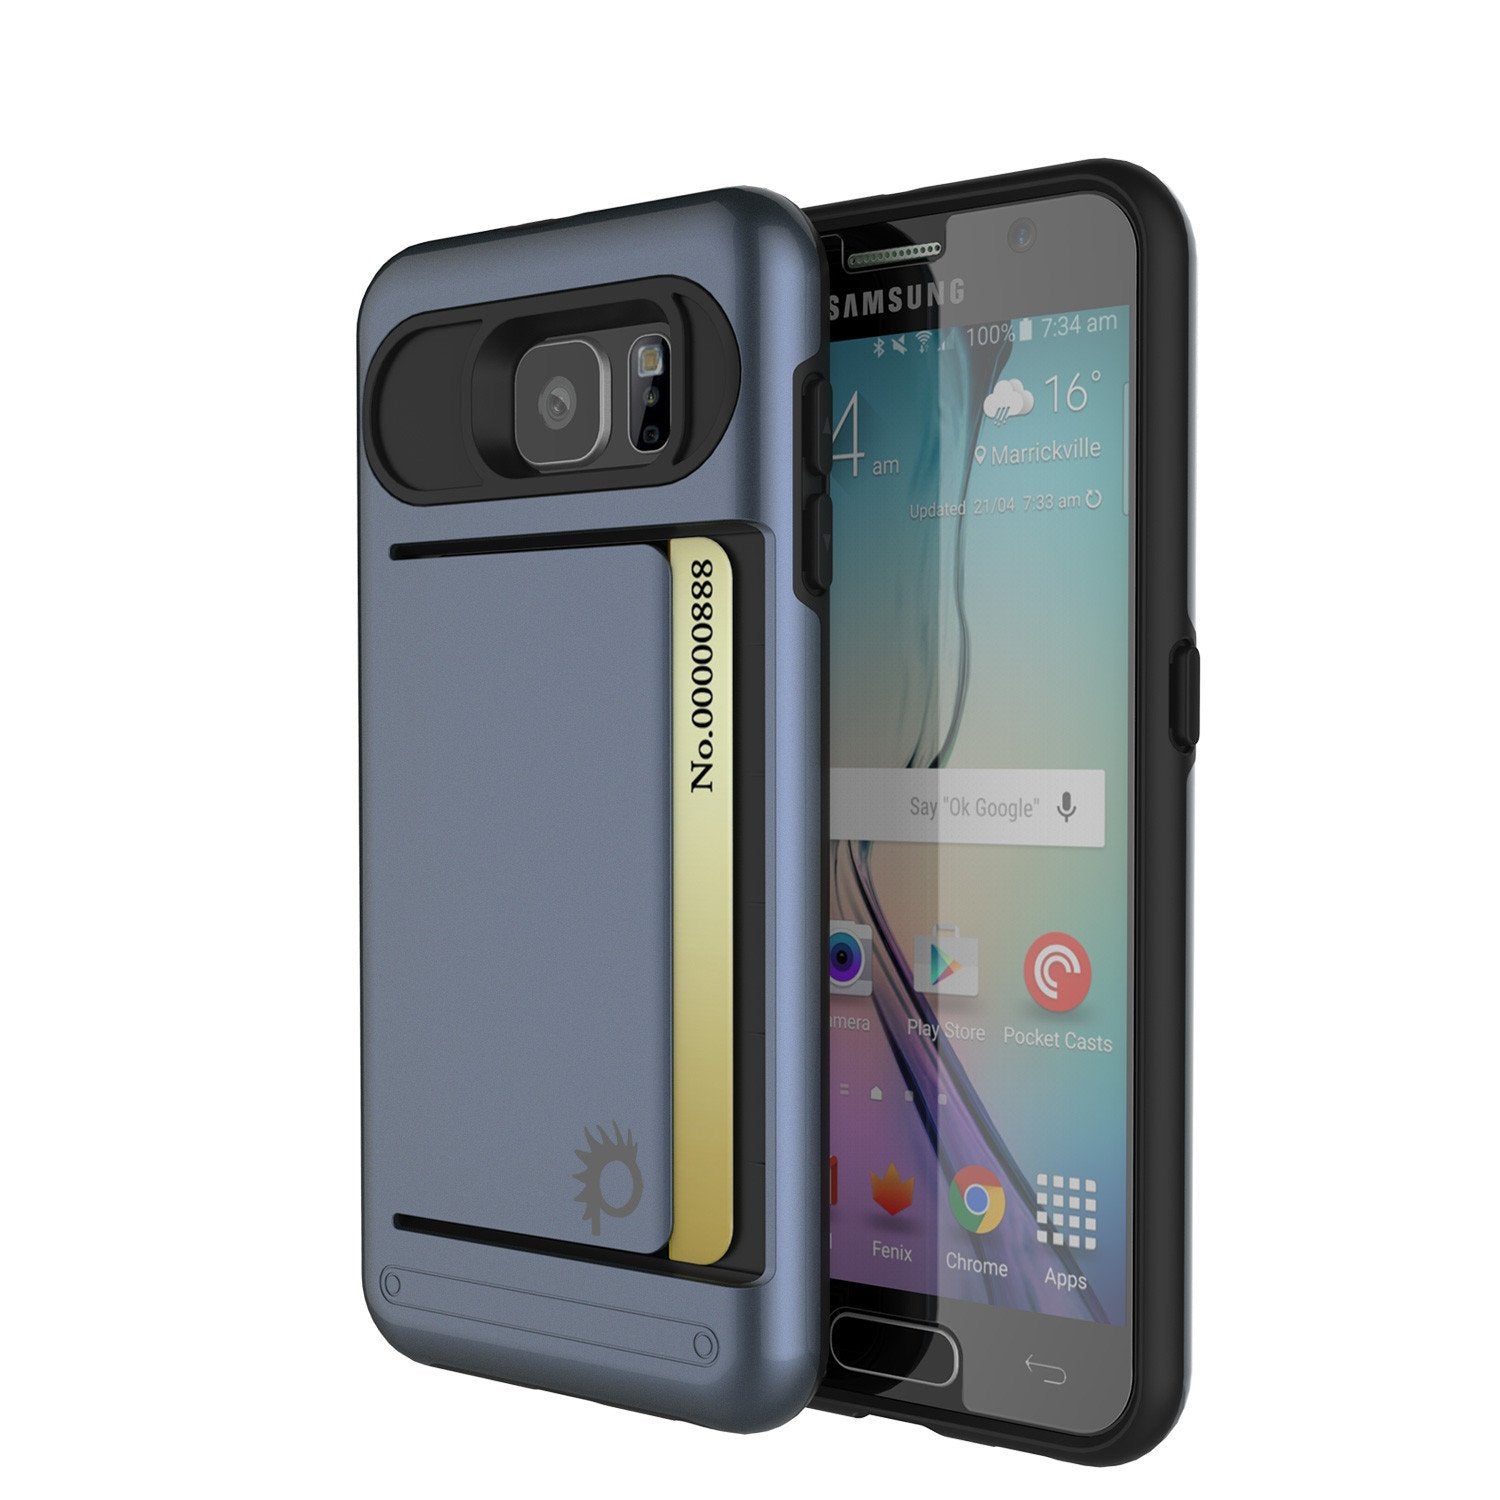 Galaxy S6 EDGE Plus Case PunkCase CLUTCH Navy Series Slim Armor Soft Cover Case w/ Screen Protector - PunkCase NZ